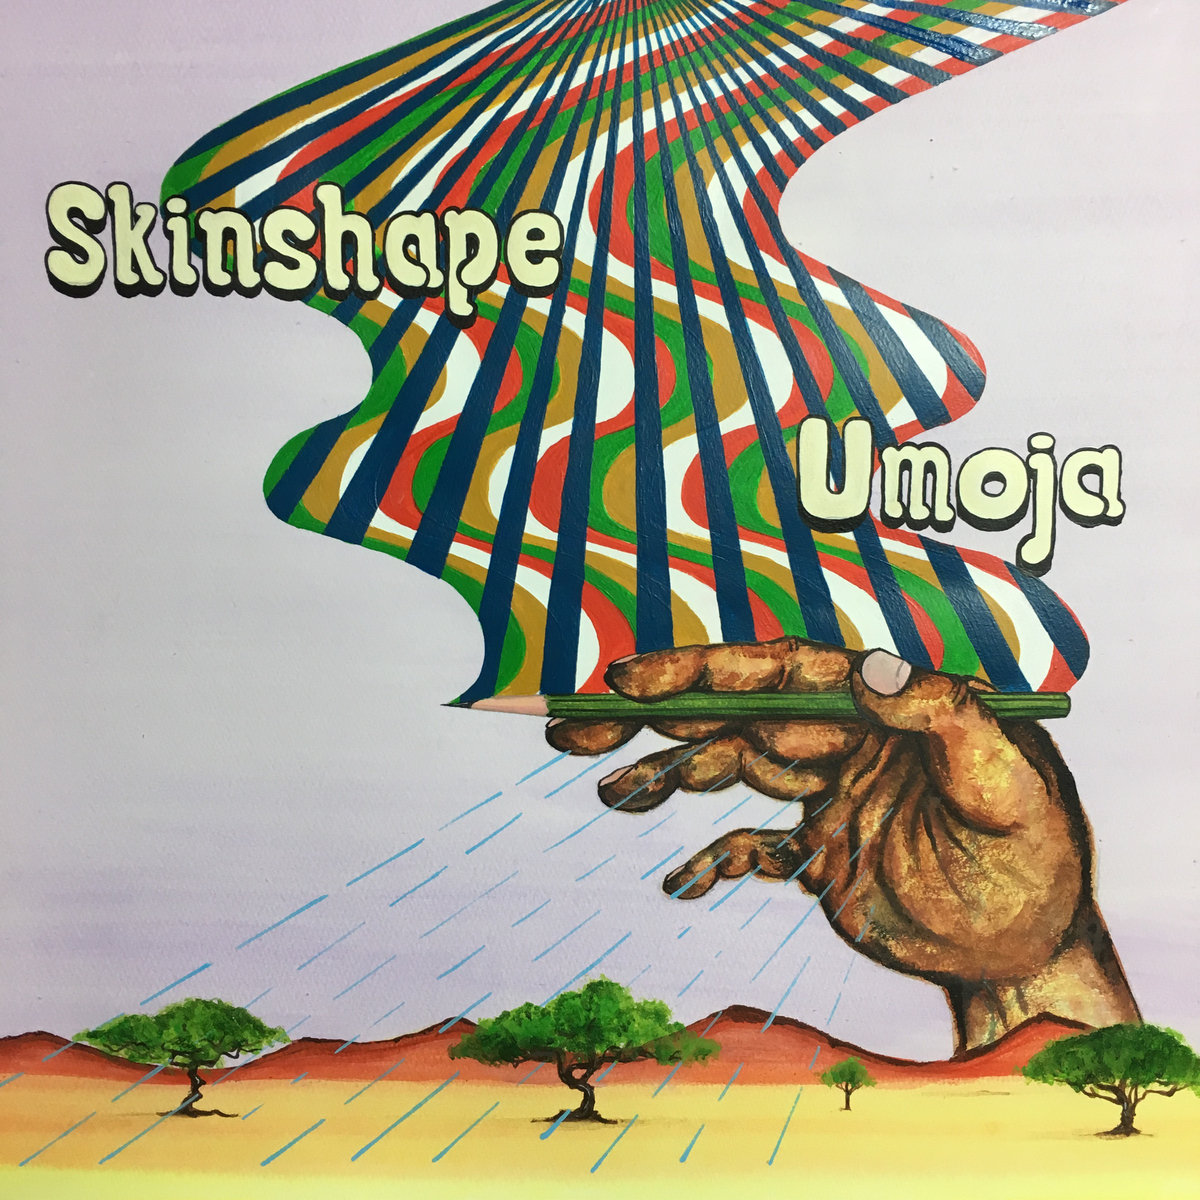 Skinshape's new album "Umoja" is pure vacation for mind and soul